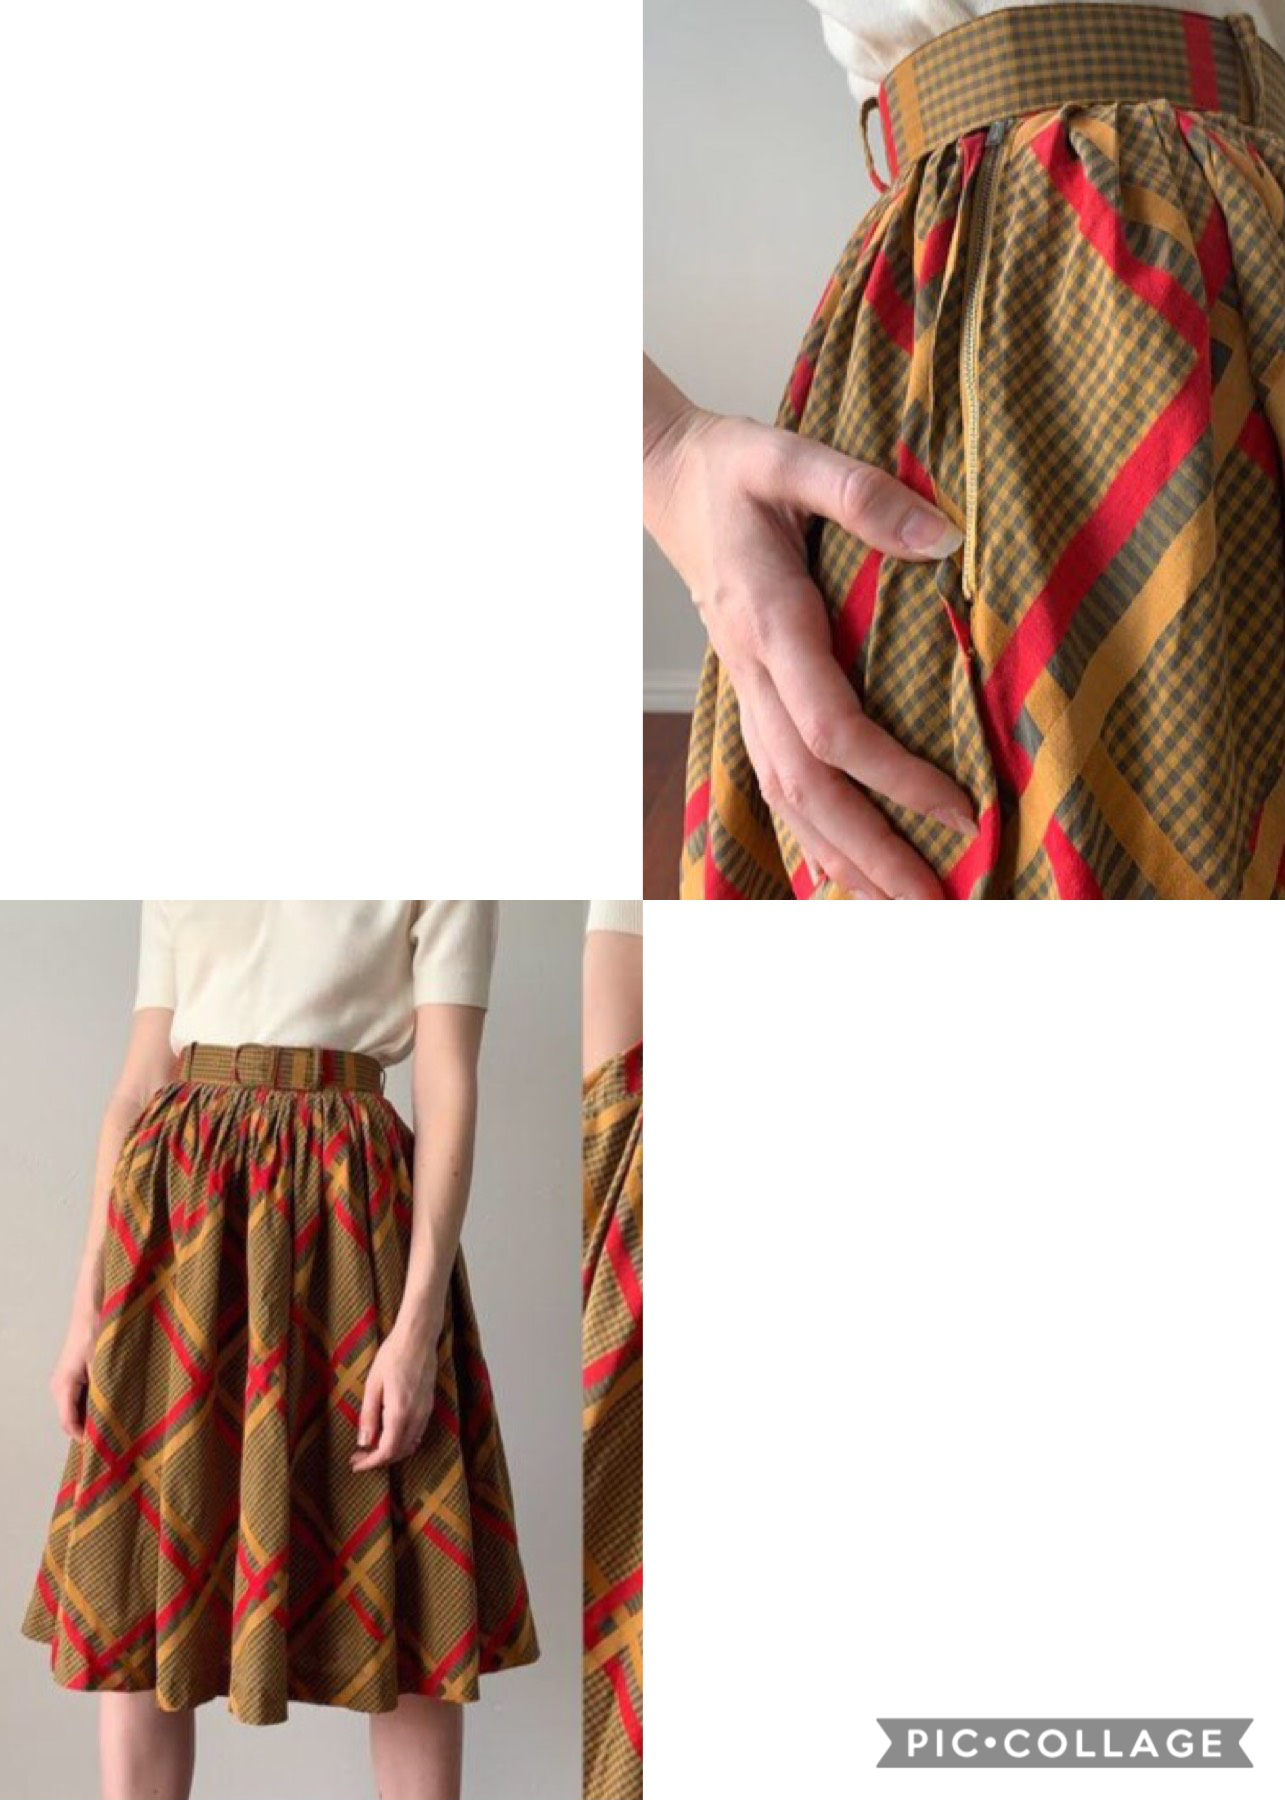 I NEED I NEED I NEEDDDD this skirt is from the 60s and it’s GORGEOUS and only $40 i wantttttt